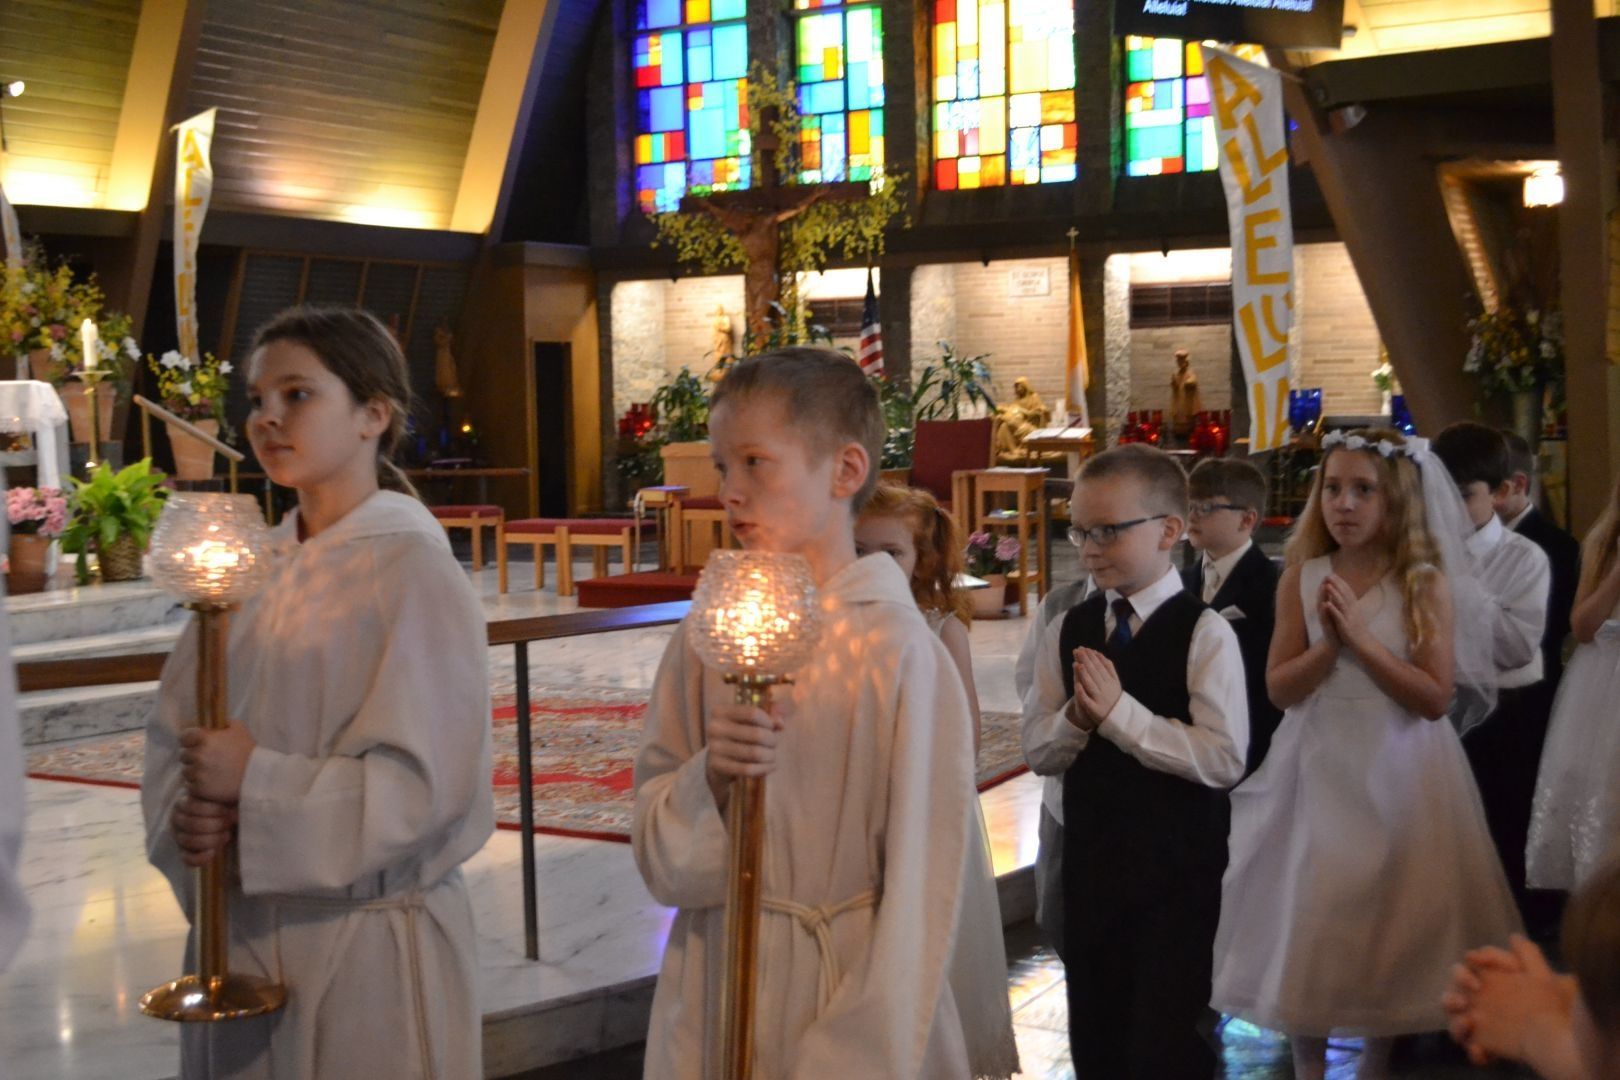 A group of children are walking through a church holding candles